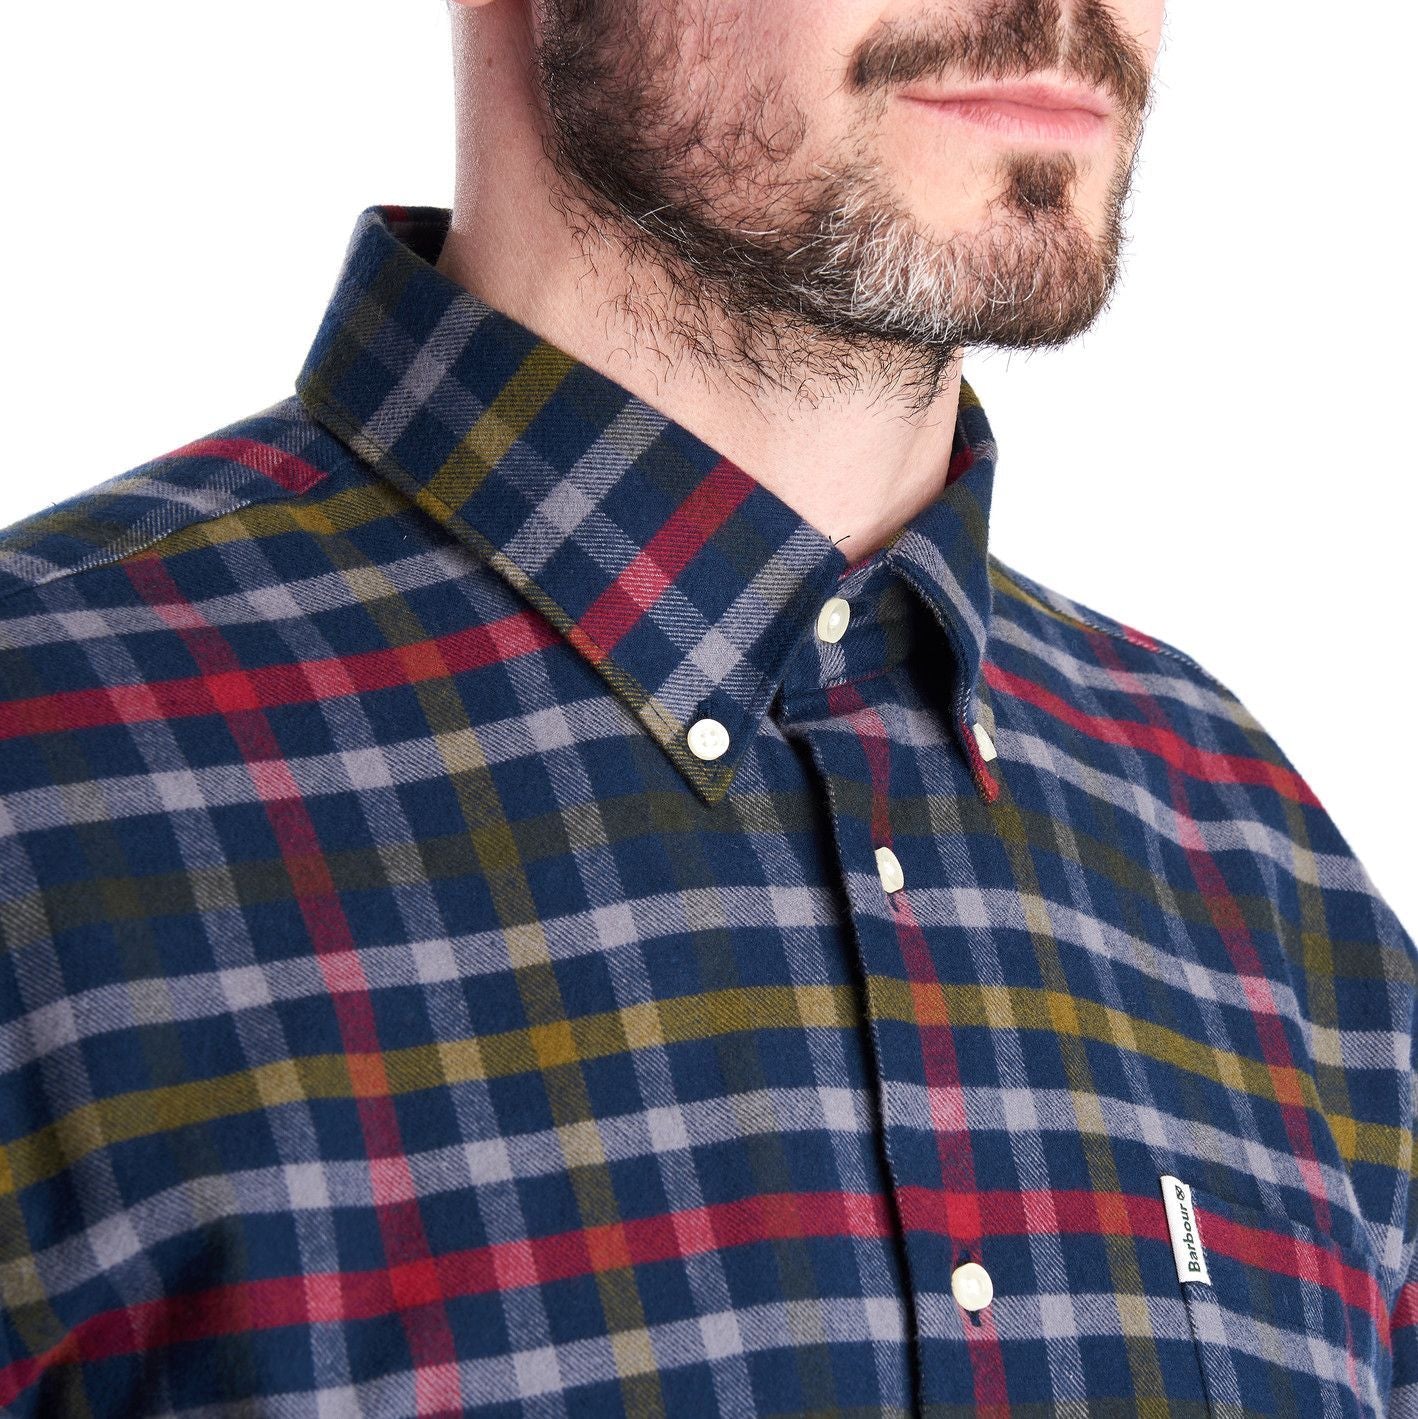 barbour brushed cotton shirts